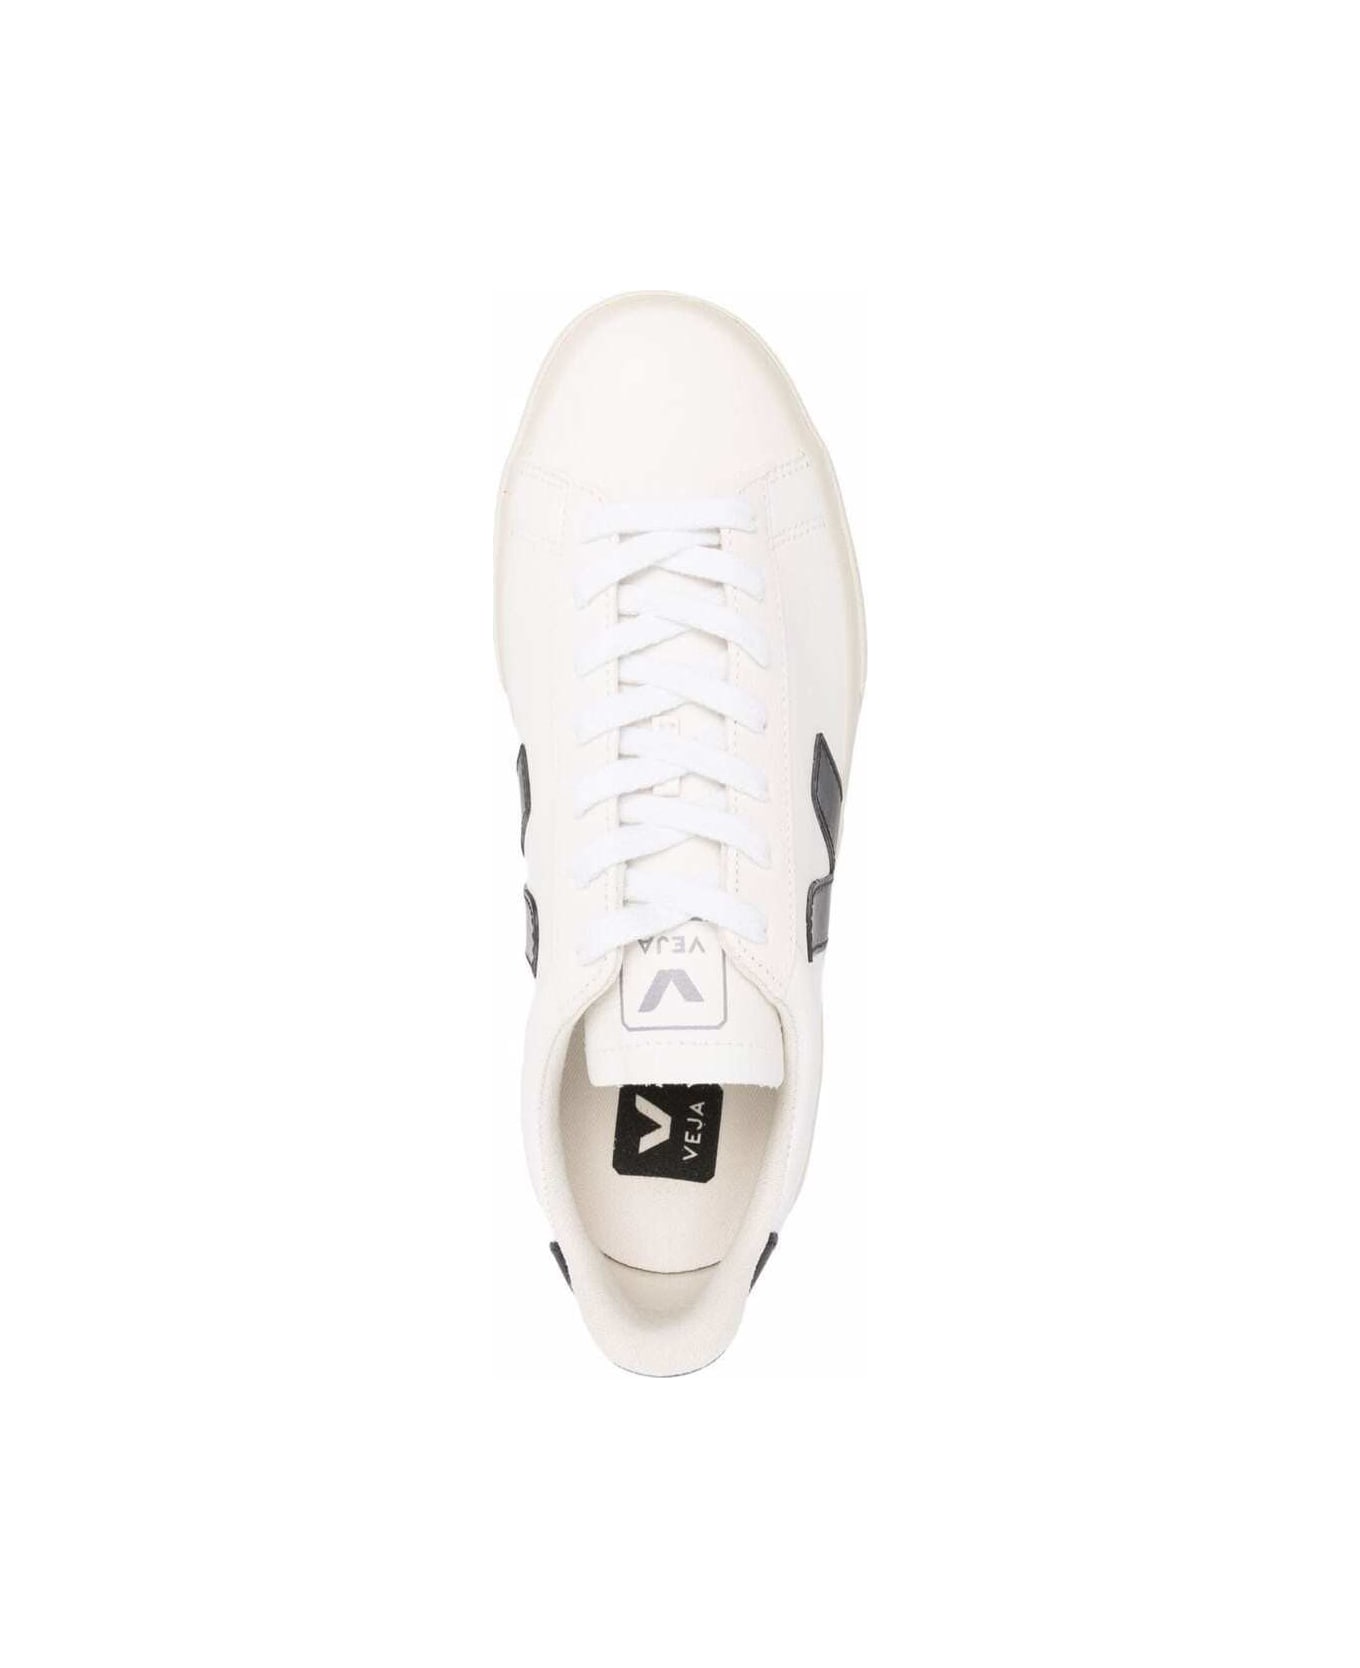 Veja Woman's Campo White And Black Vegan Leather Sneakers - Extra White Black